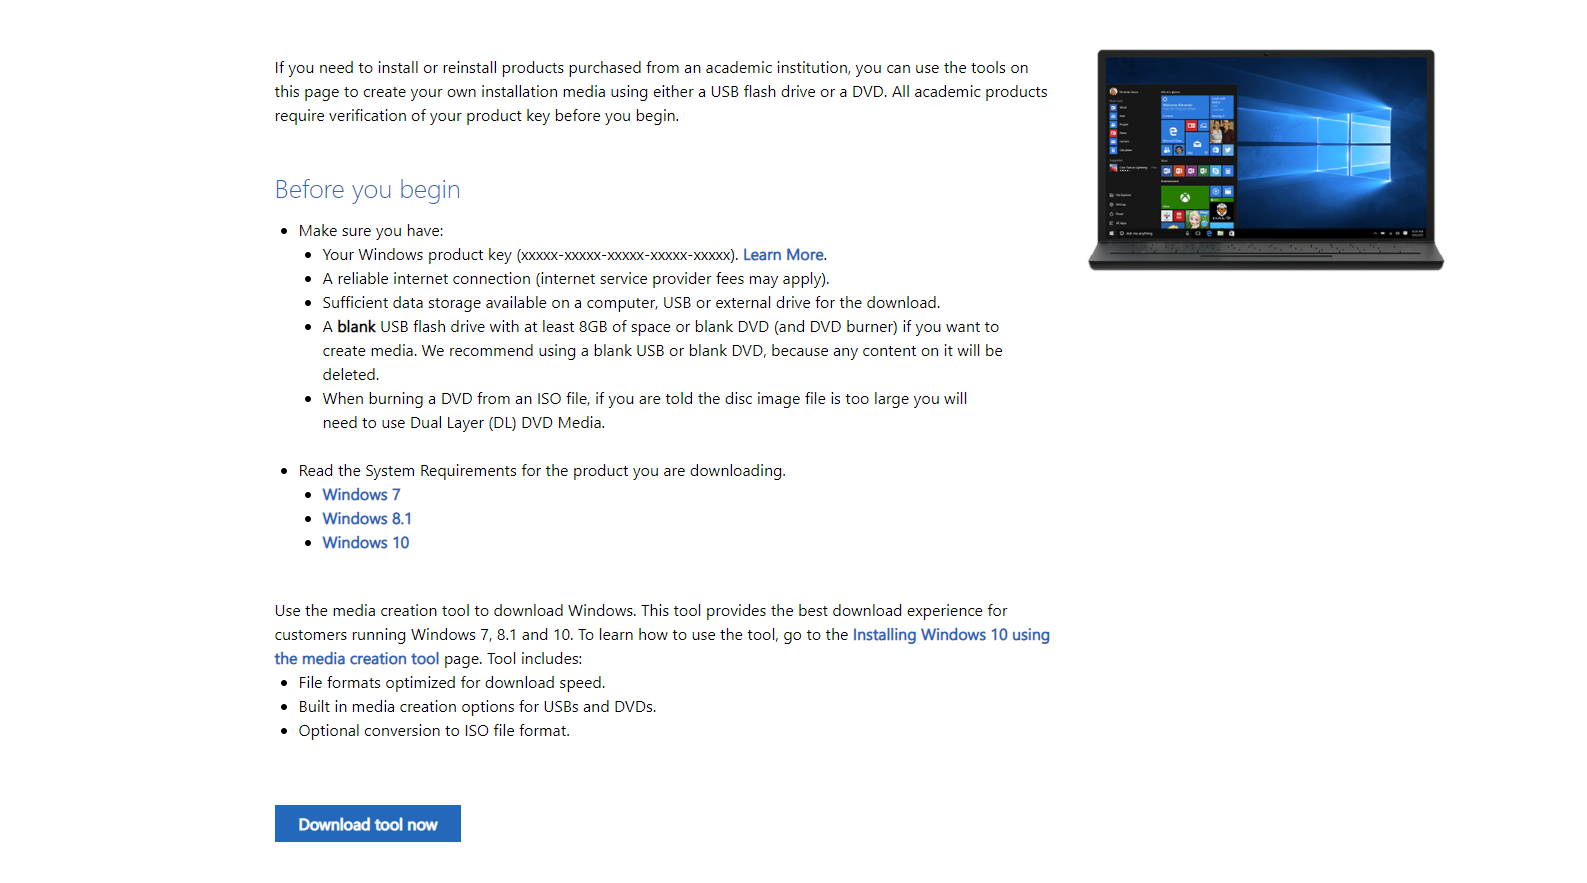 Windows 10 education ISO download webbpage is not the same? c9e64ae1-282b-498b-8341-ae2434f328d7?upload=true.png